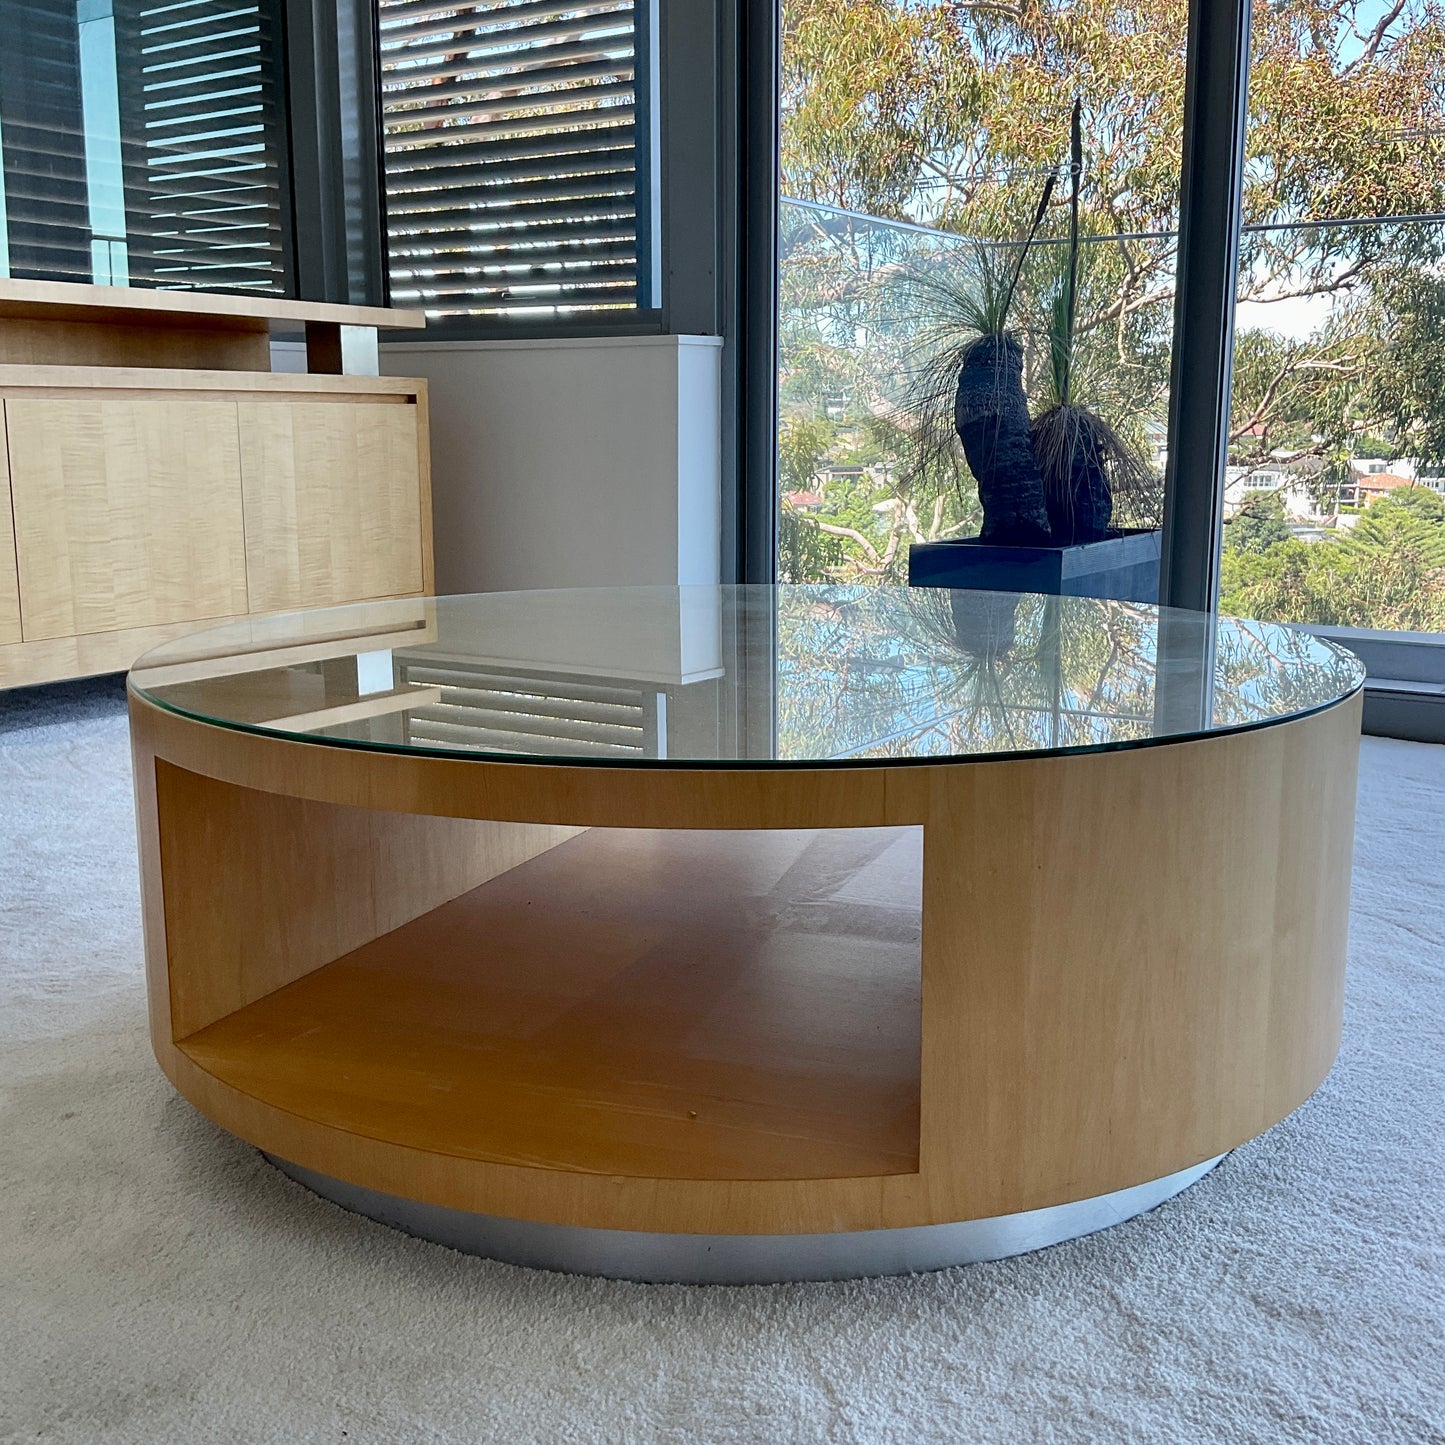 Load image into Gallery viewer, Round Coffee Table by James Salmond
